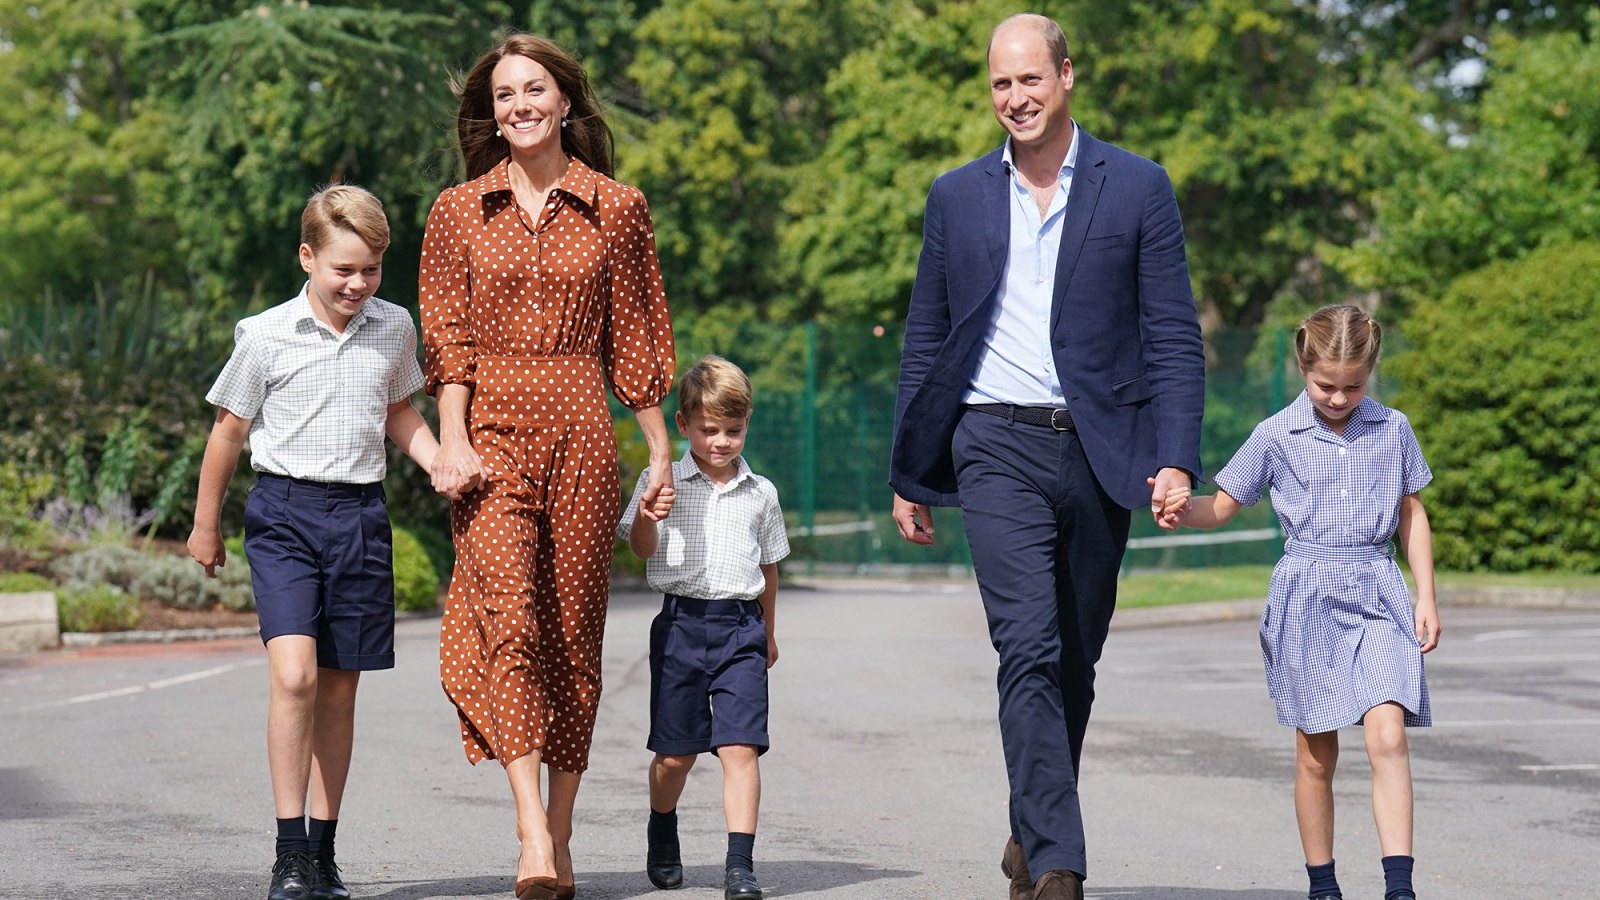 Princess Kate Reveals Her 3 Kids’ Reaction to Prince William Engagement Photos: ‘Mummy, You Look So Young’